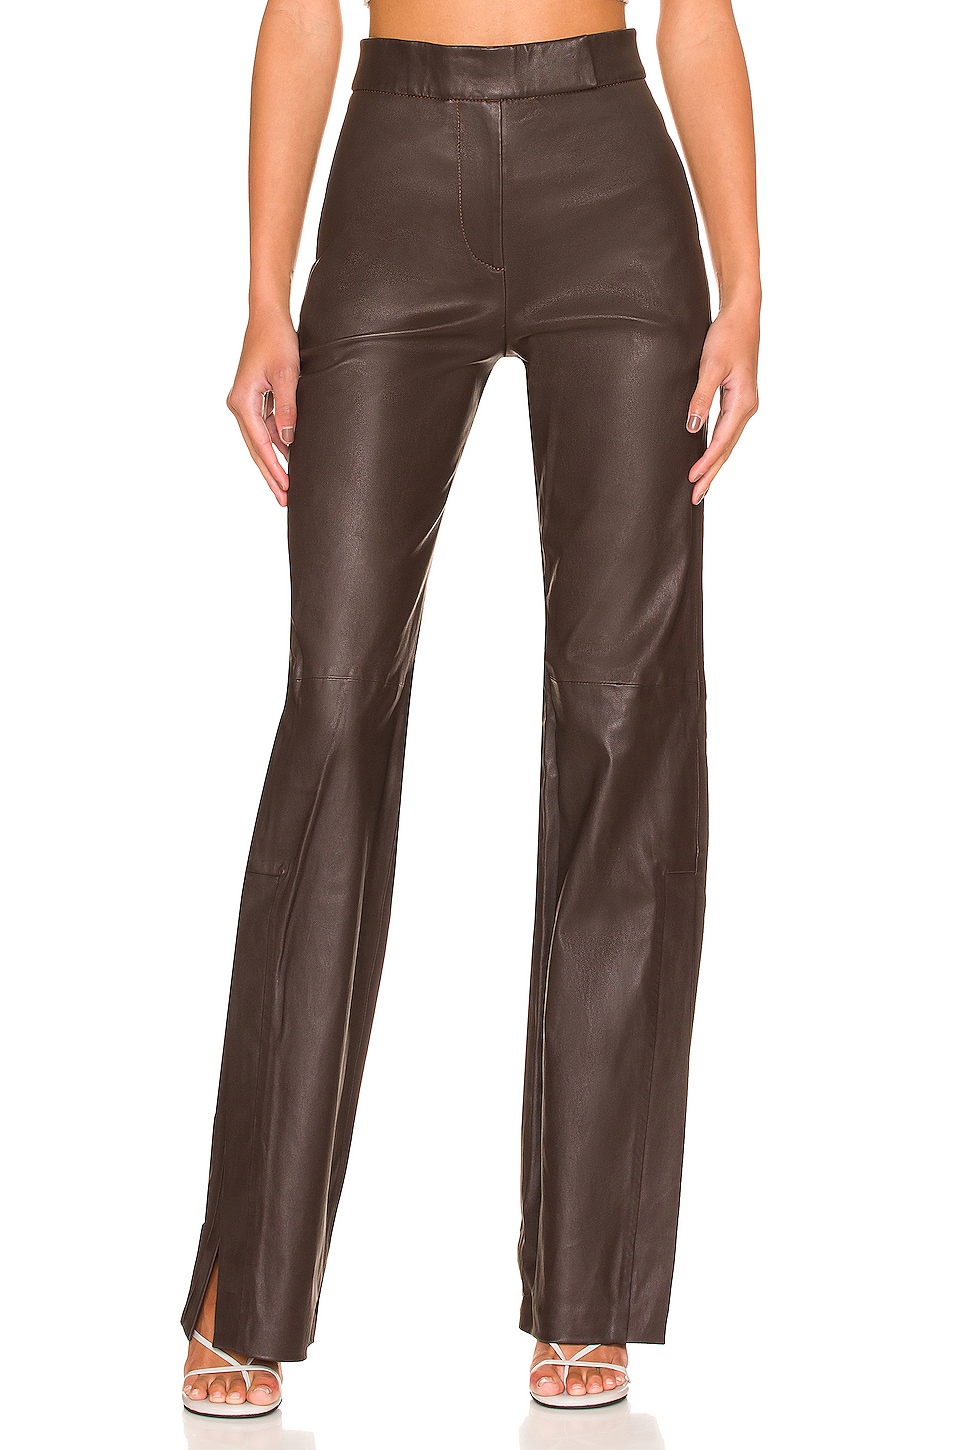 L'Academie Court Leather Pant in Brown